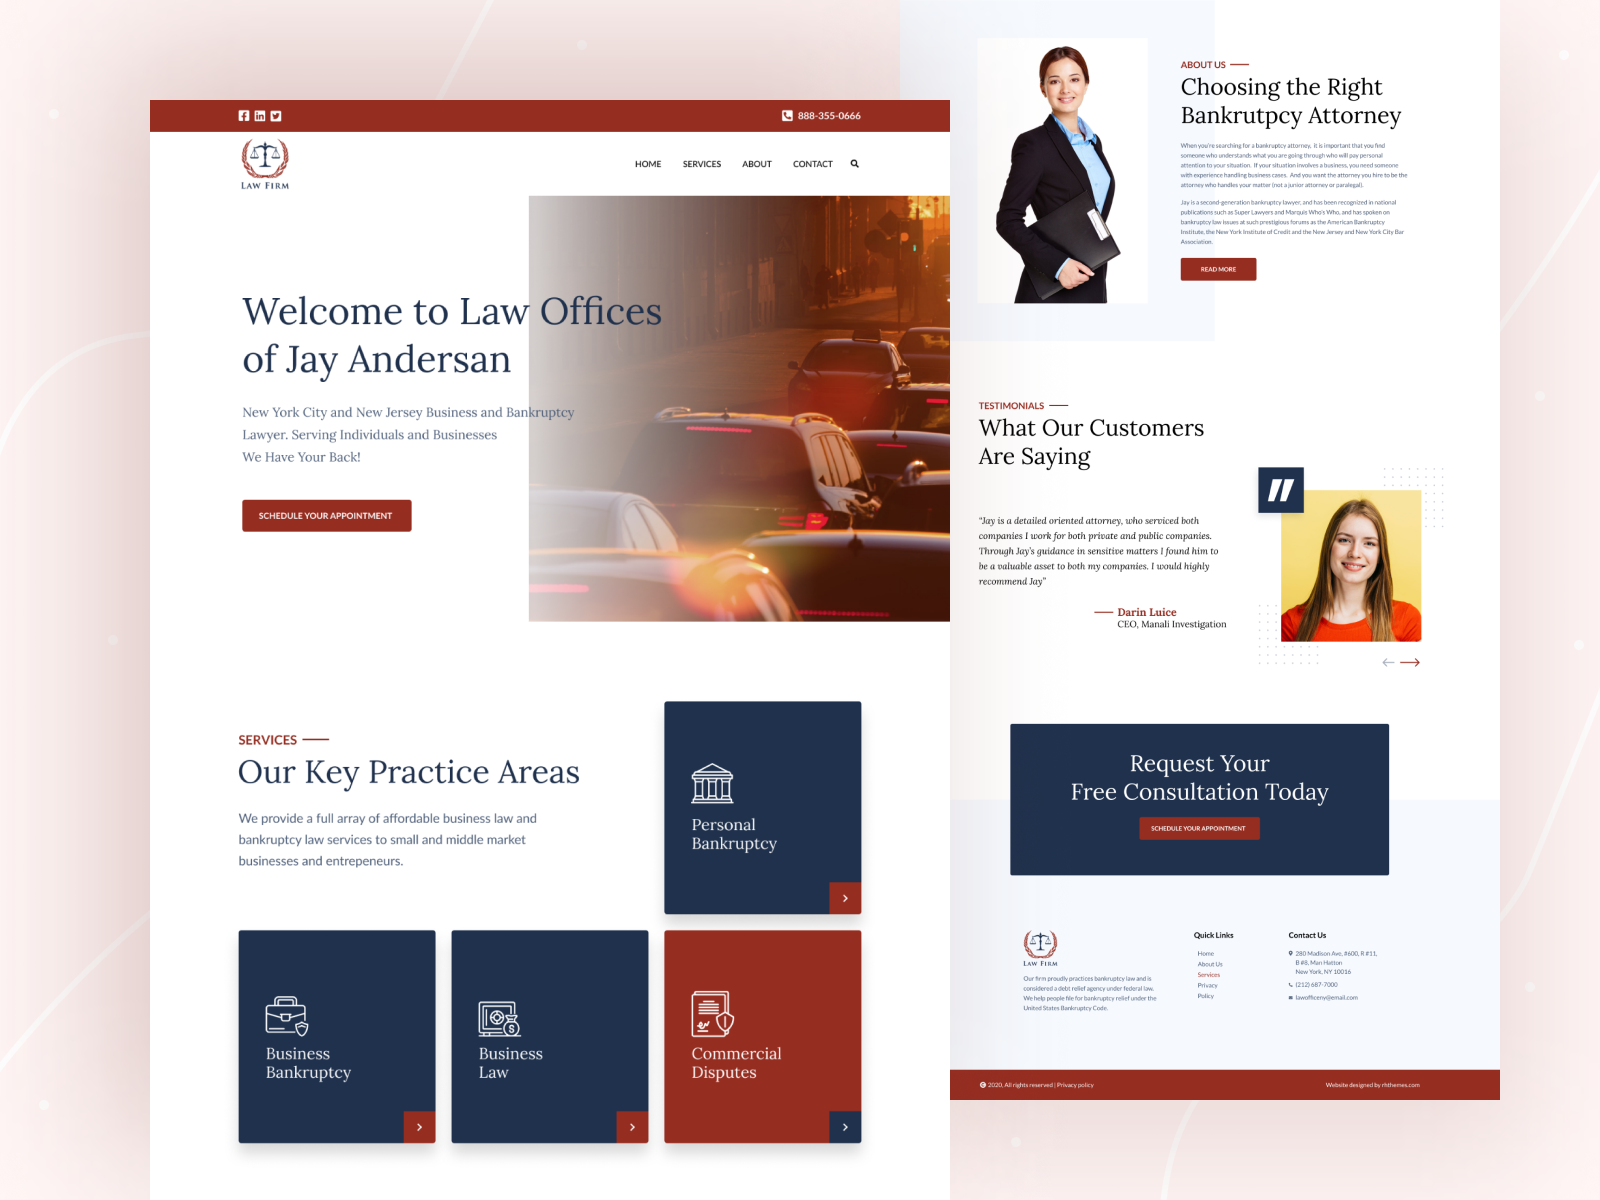 Local 45 Best Law Firm Website Design Examples You've Probably ...